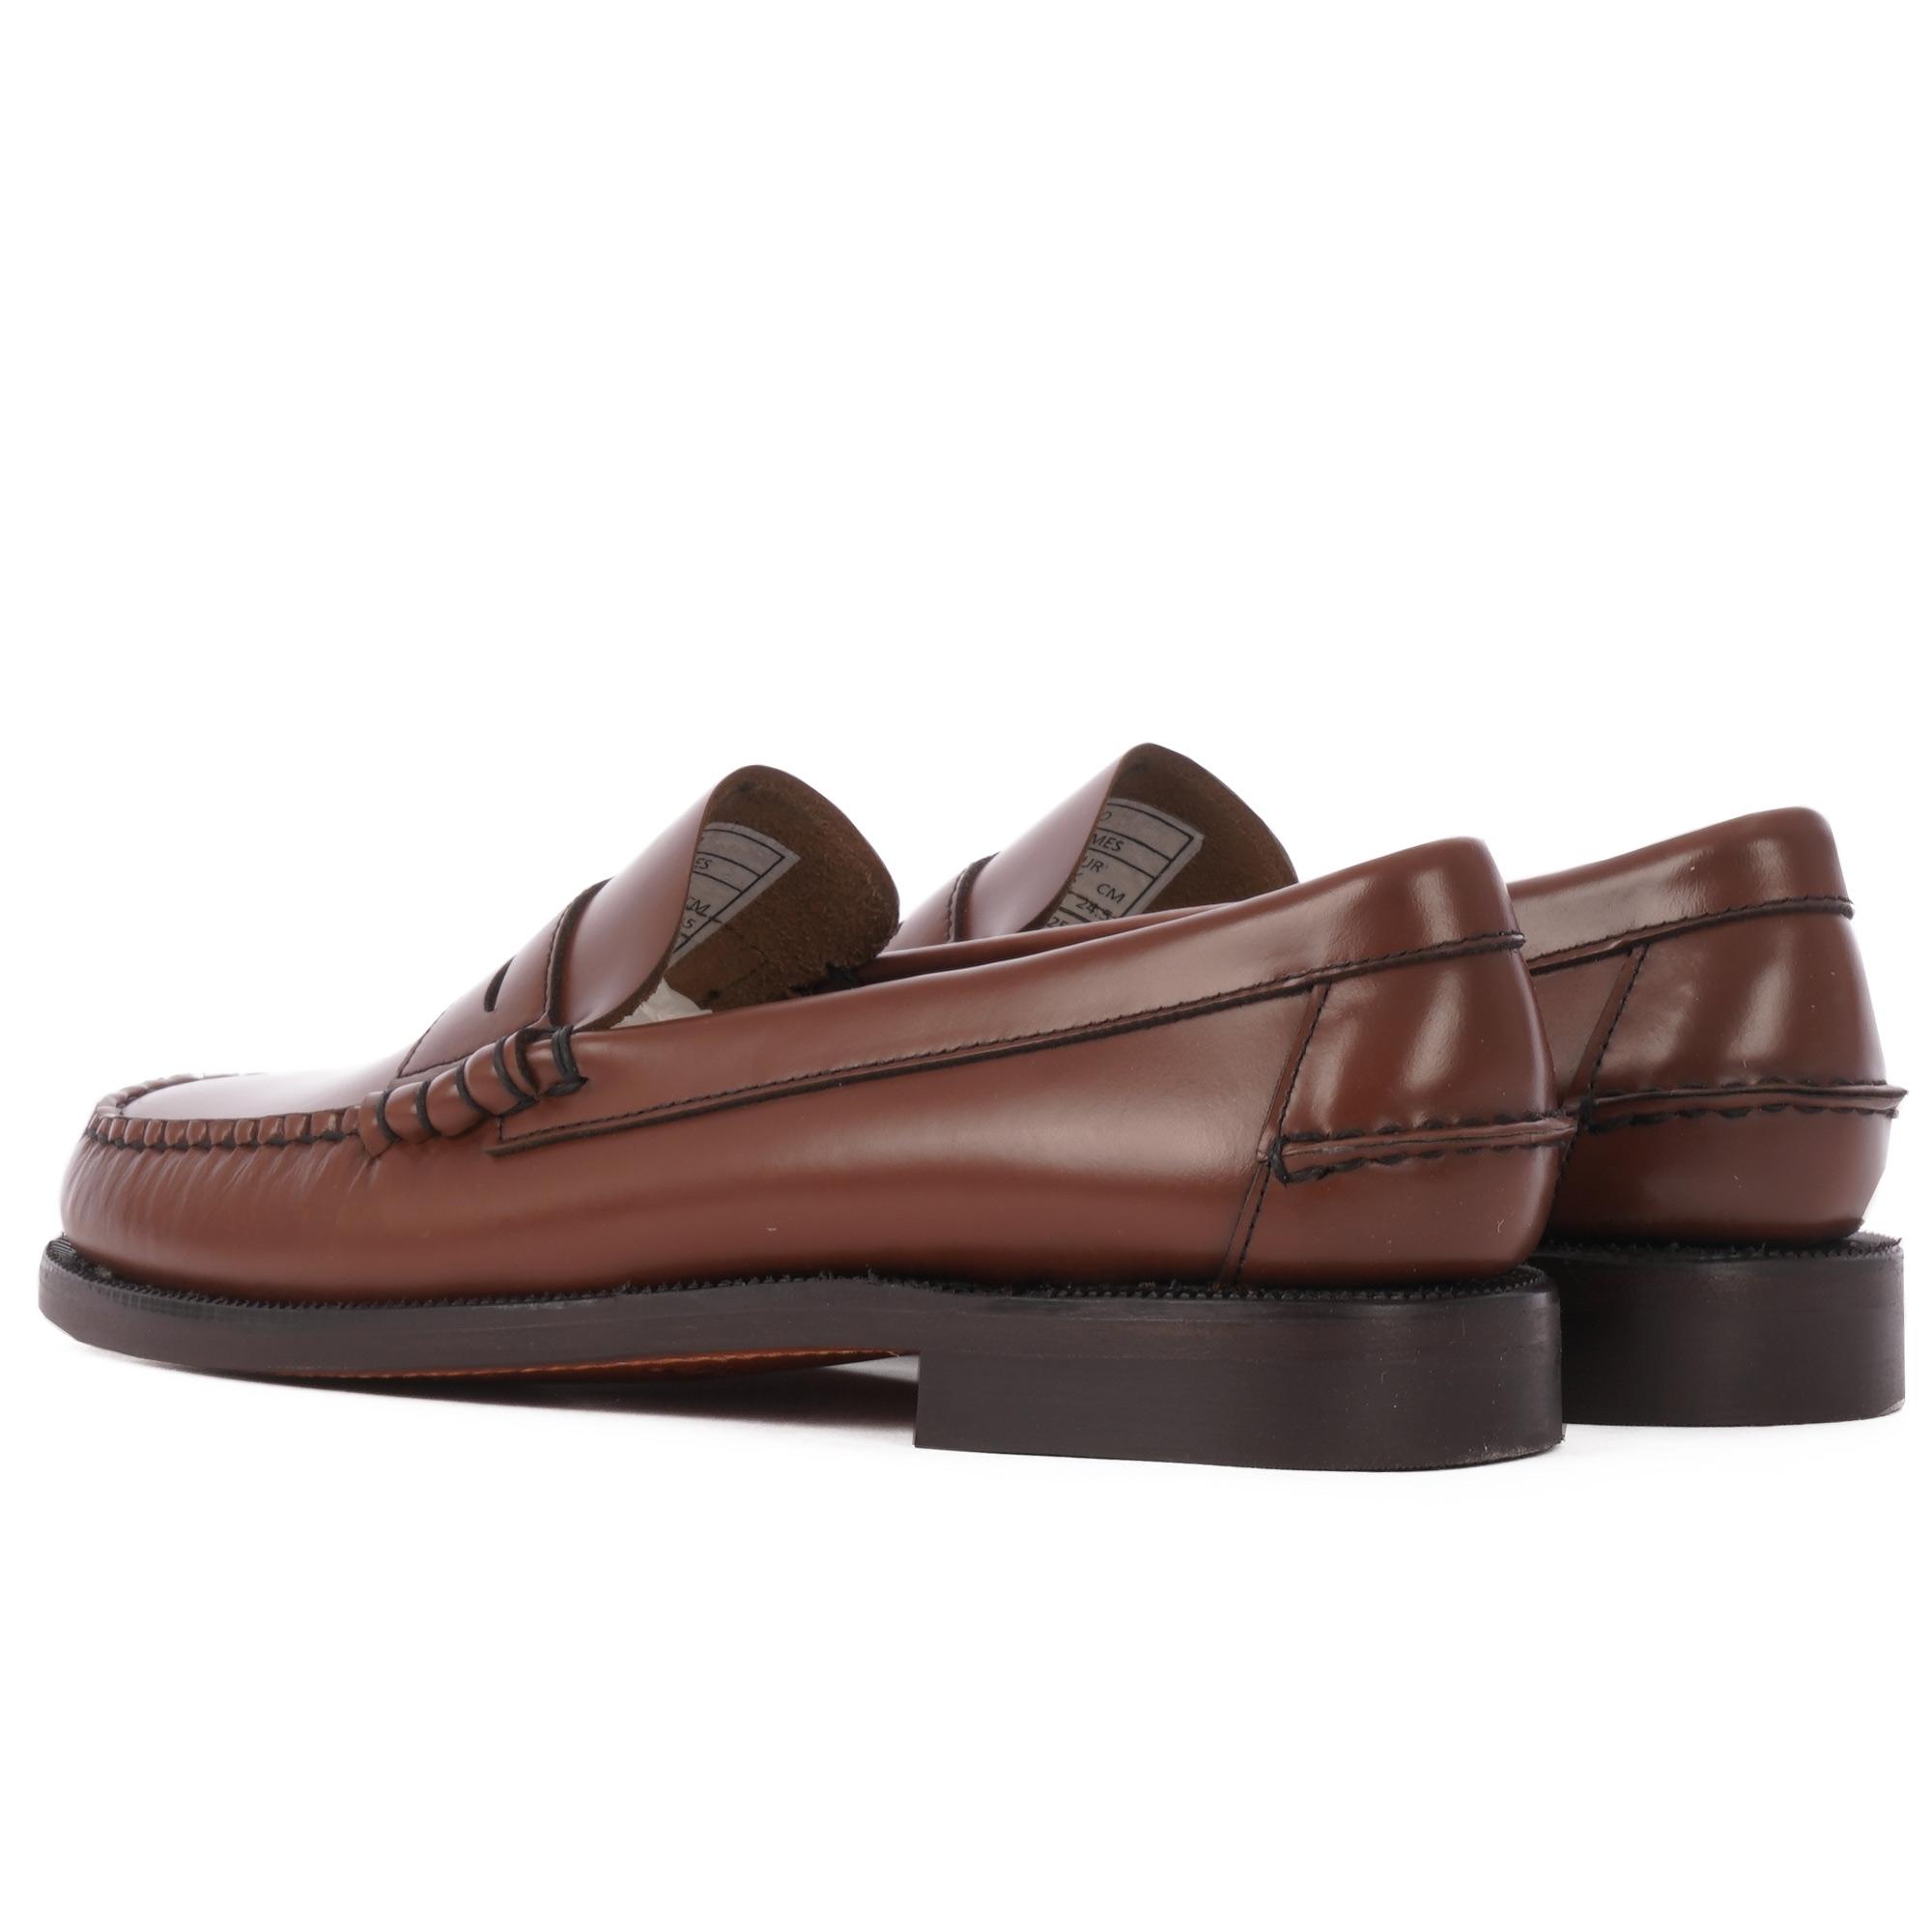 Sebago Classic Dan Leather Loafers in Brown for Men - Save 1% - Lyst